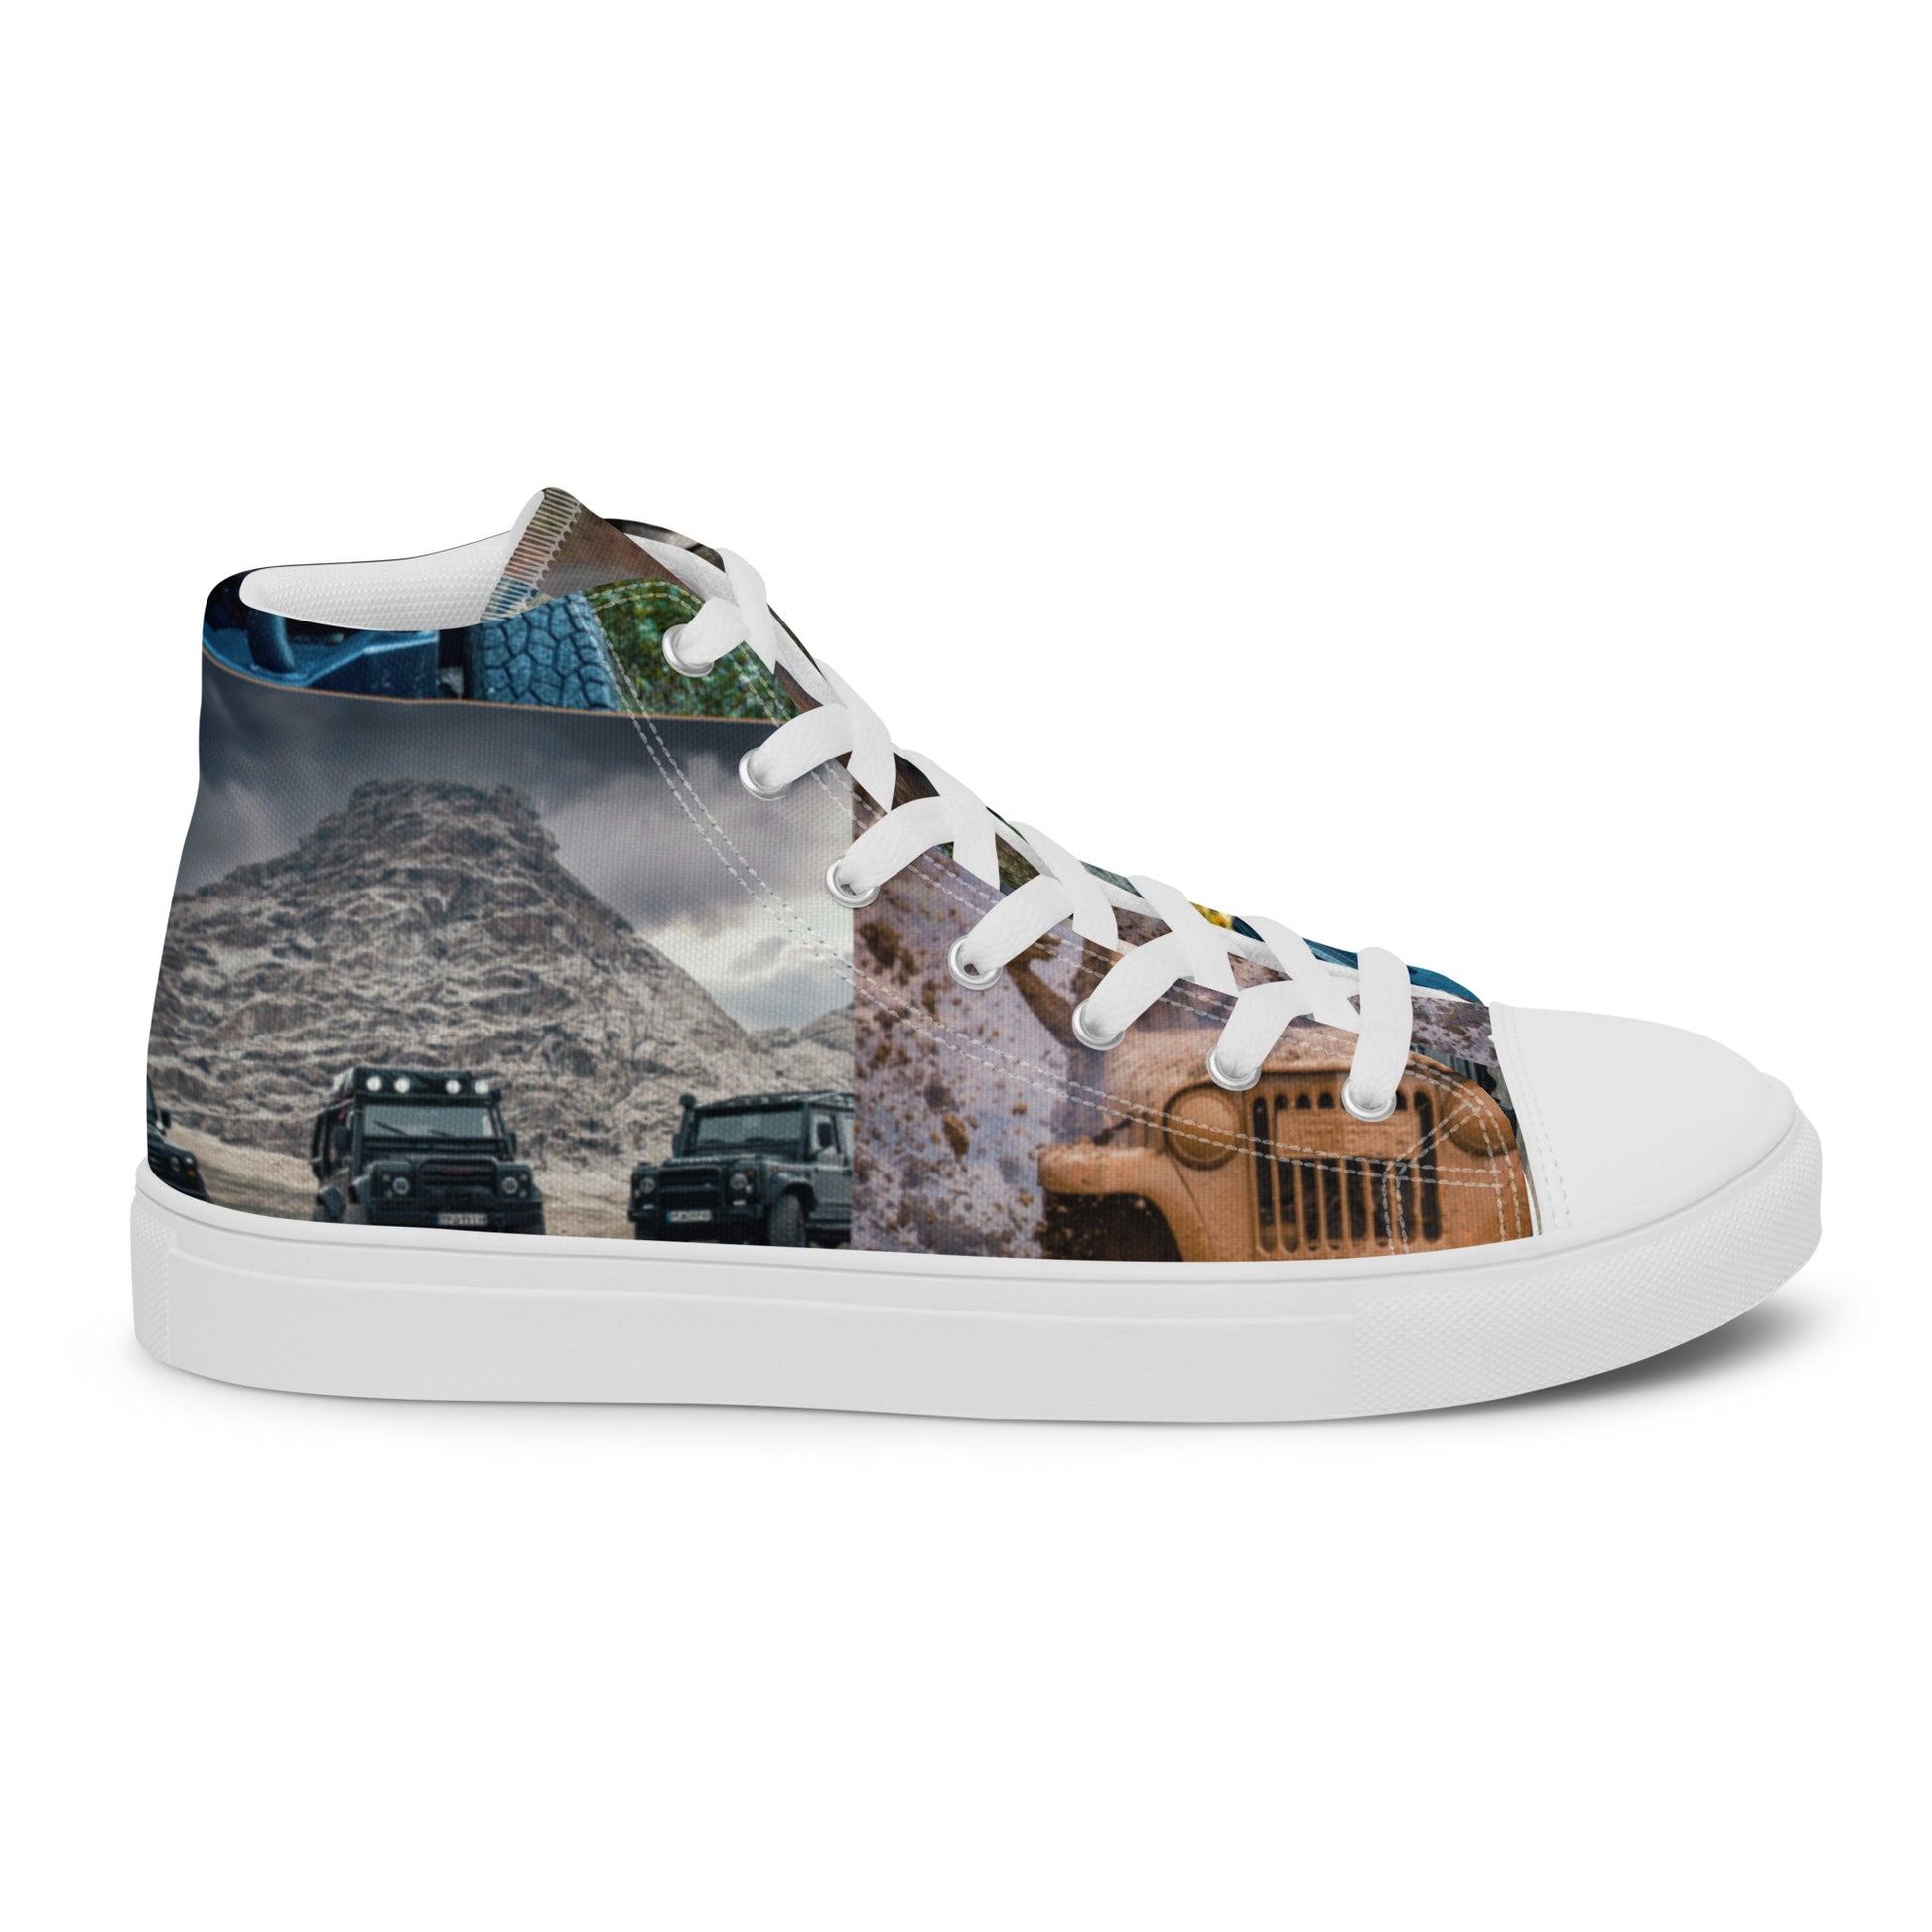 Muddy Life Women’s High Top Canvas Shoes | BKLA | Shoes & Accessories | shoes, hats, phone covers, tote bags, clutch bags